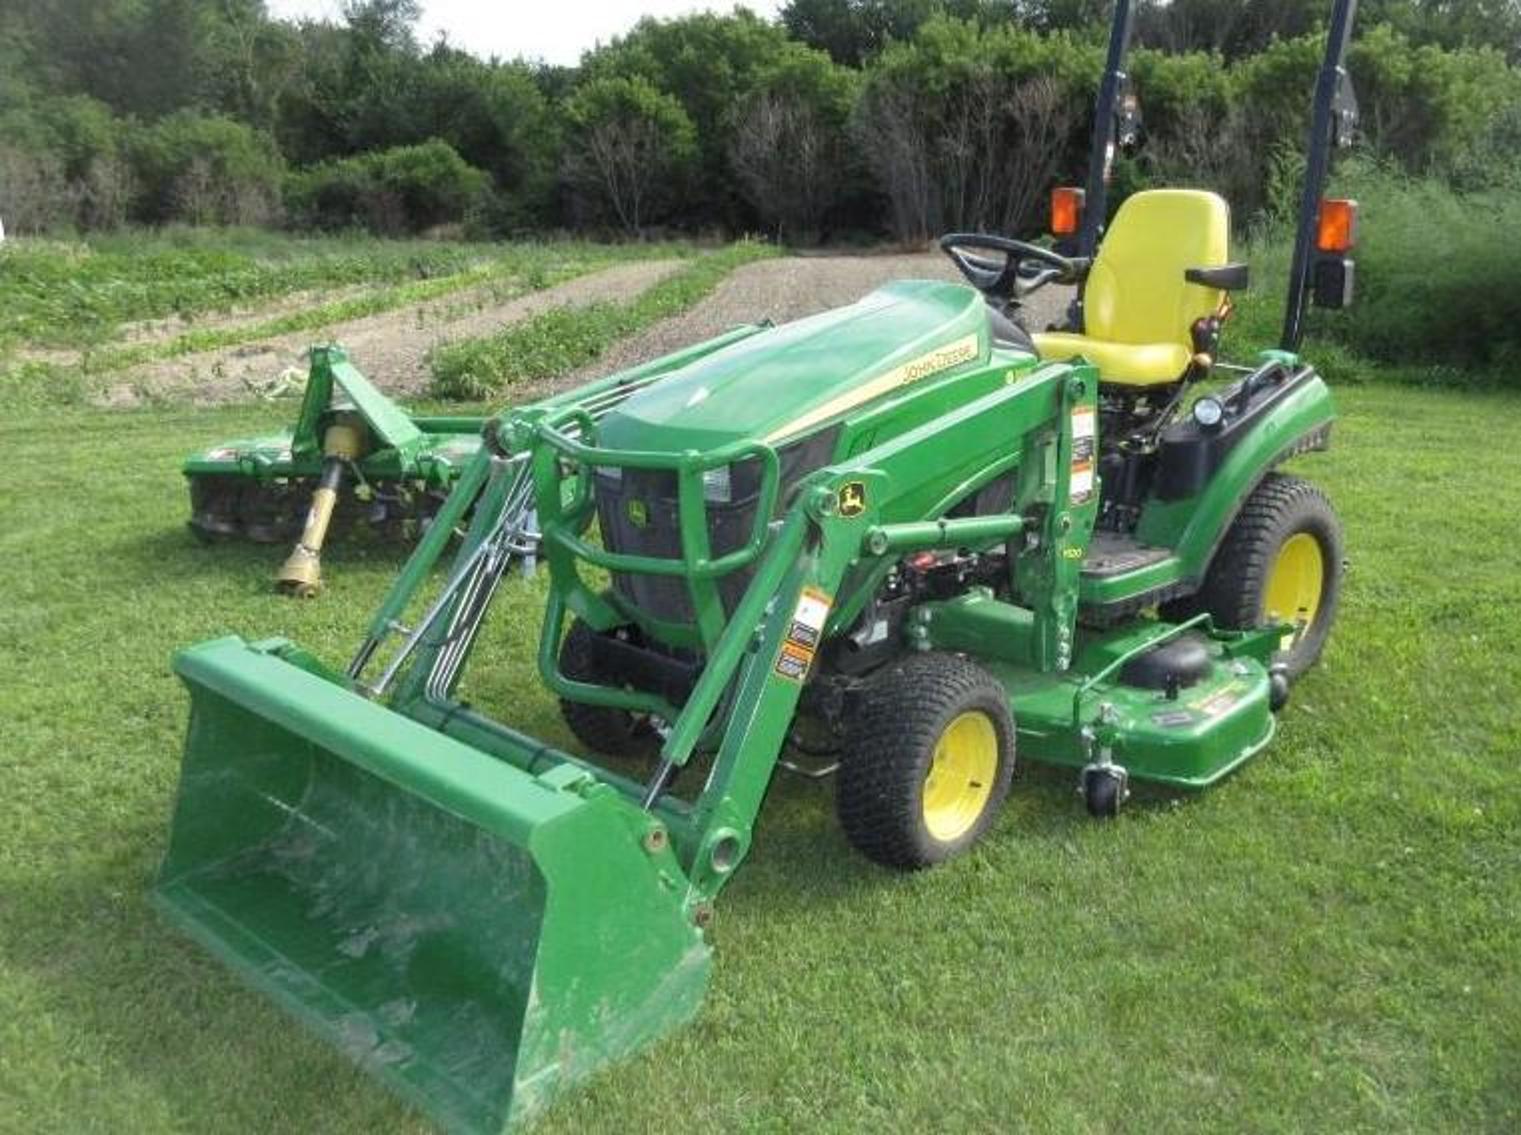 Compact Tractors, Farm Machinery, Trailers, Tools, Misc. and More